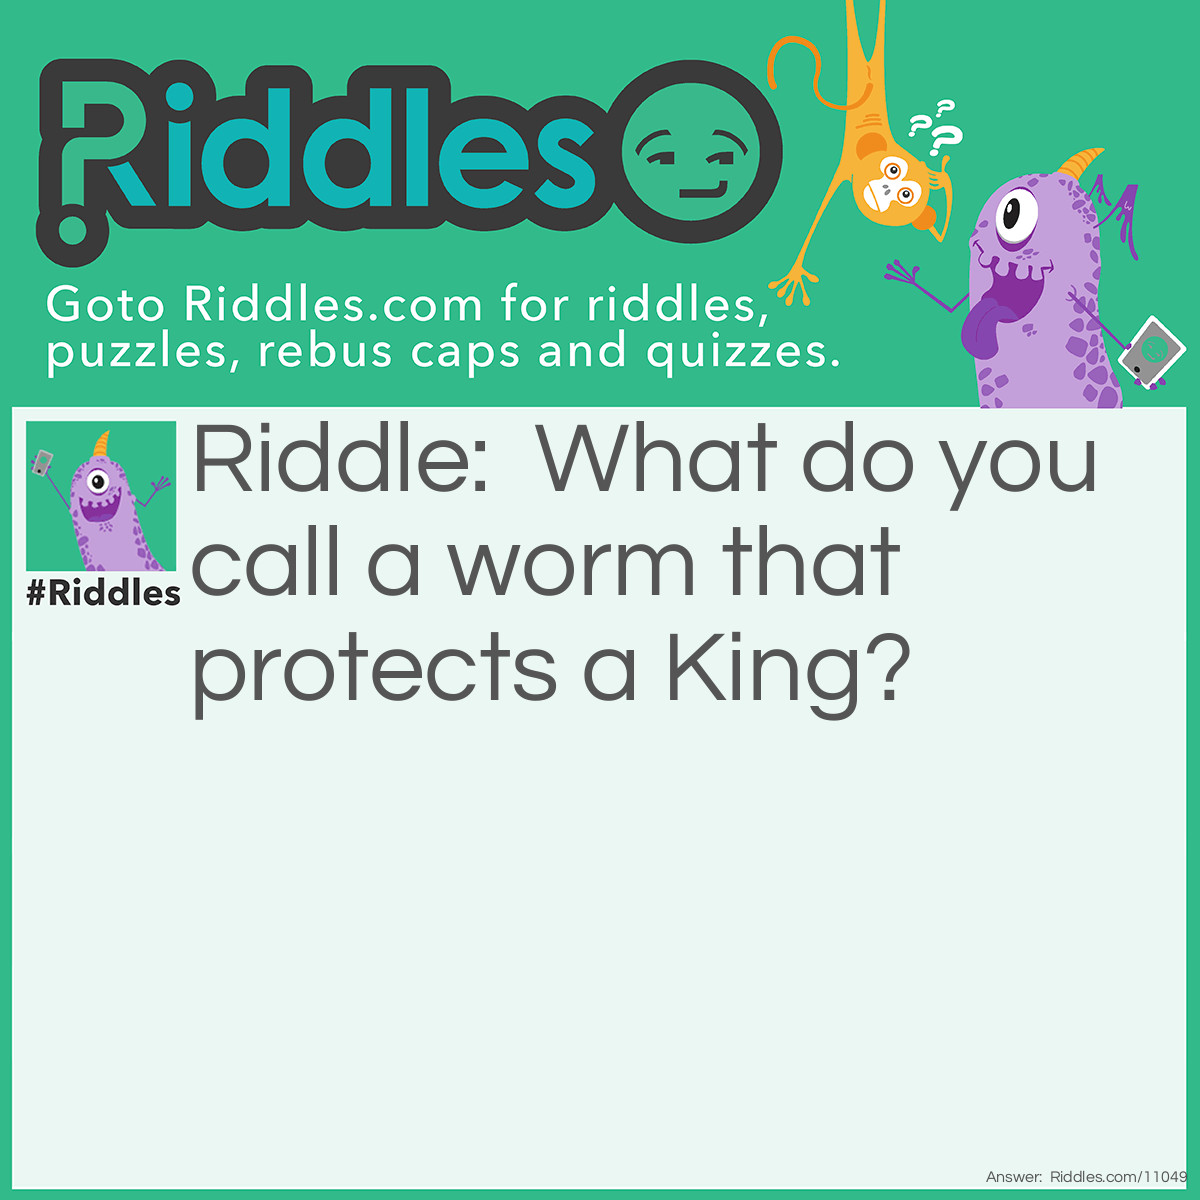 Riddle: What do you call a worm that protects a King? Answer: A Knightcrawler.